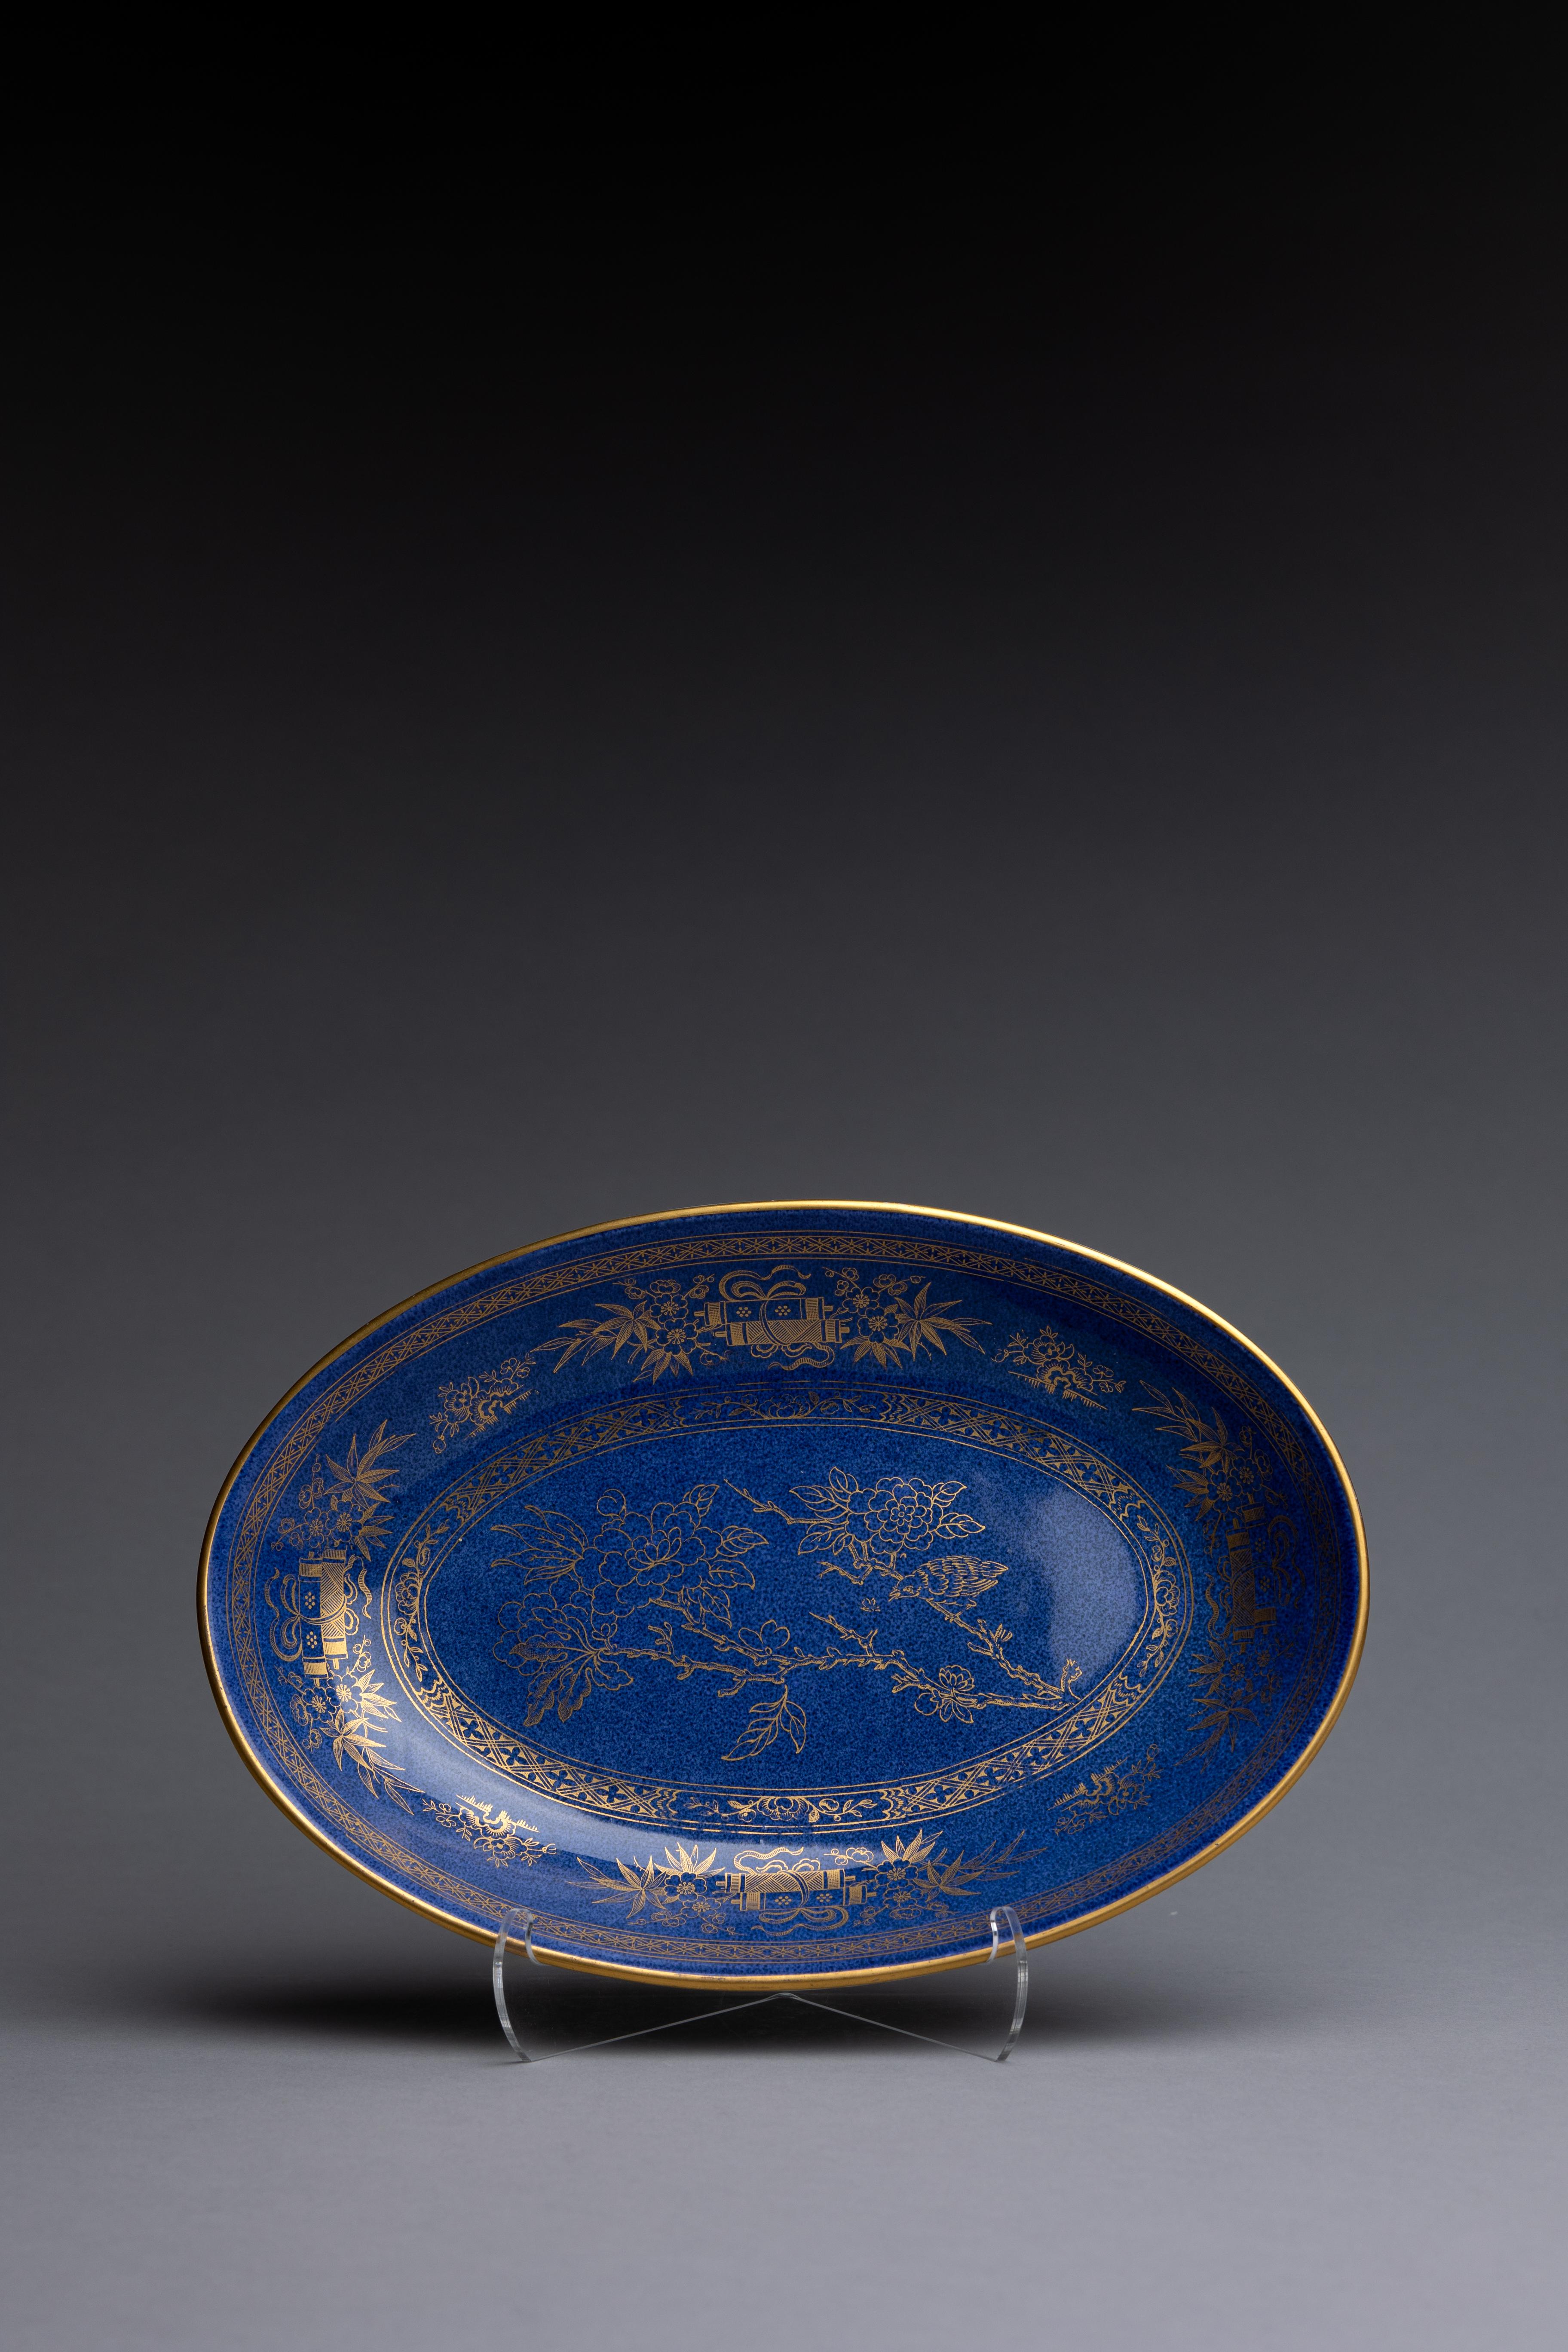 An early 20th century Wedgwood powder blue oval serving dish with gilded chinoiserie floral decoration.

The Wedgwood factory began experimentation to create powder-blue, or bleu soufflé, wares in the beginning of the 20th century. It took for its